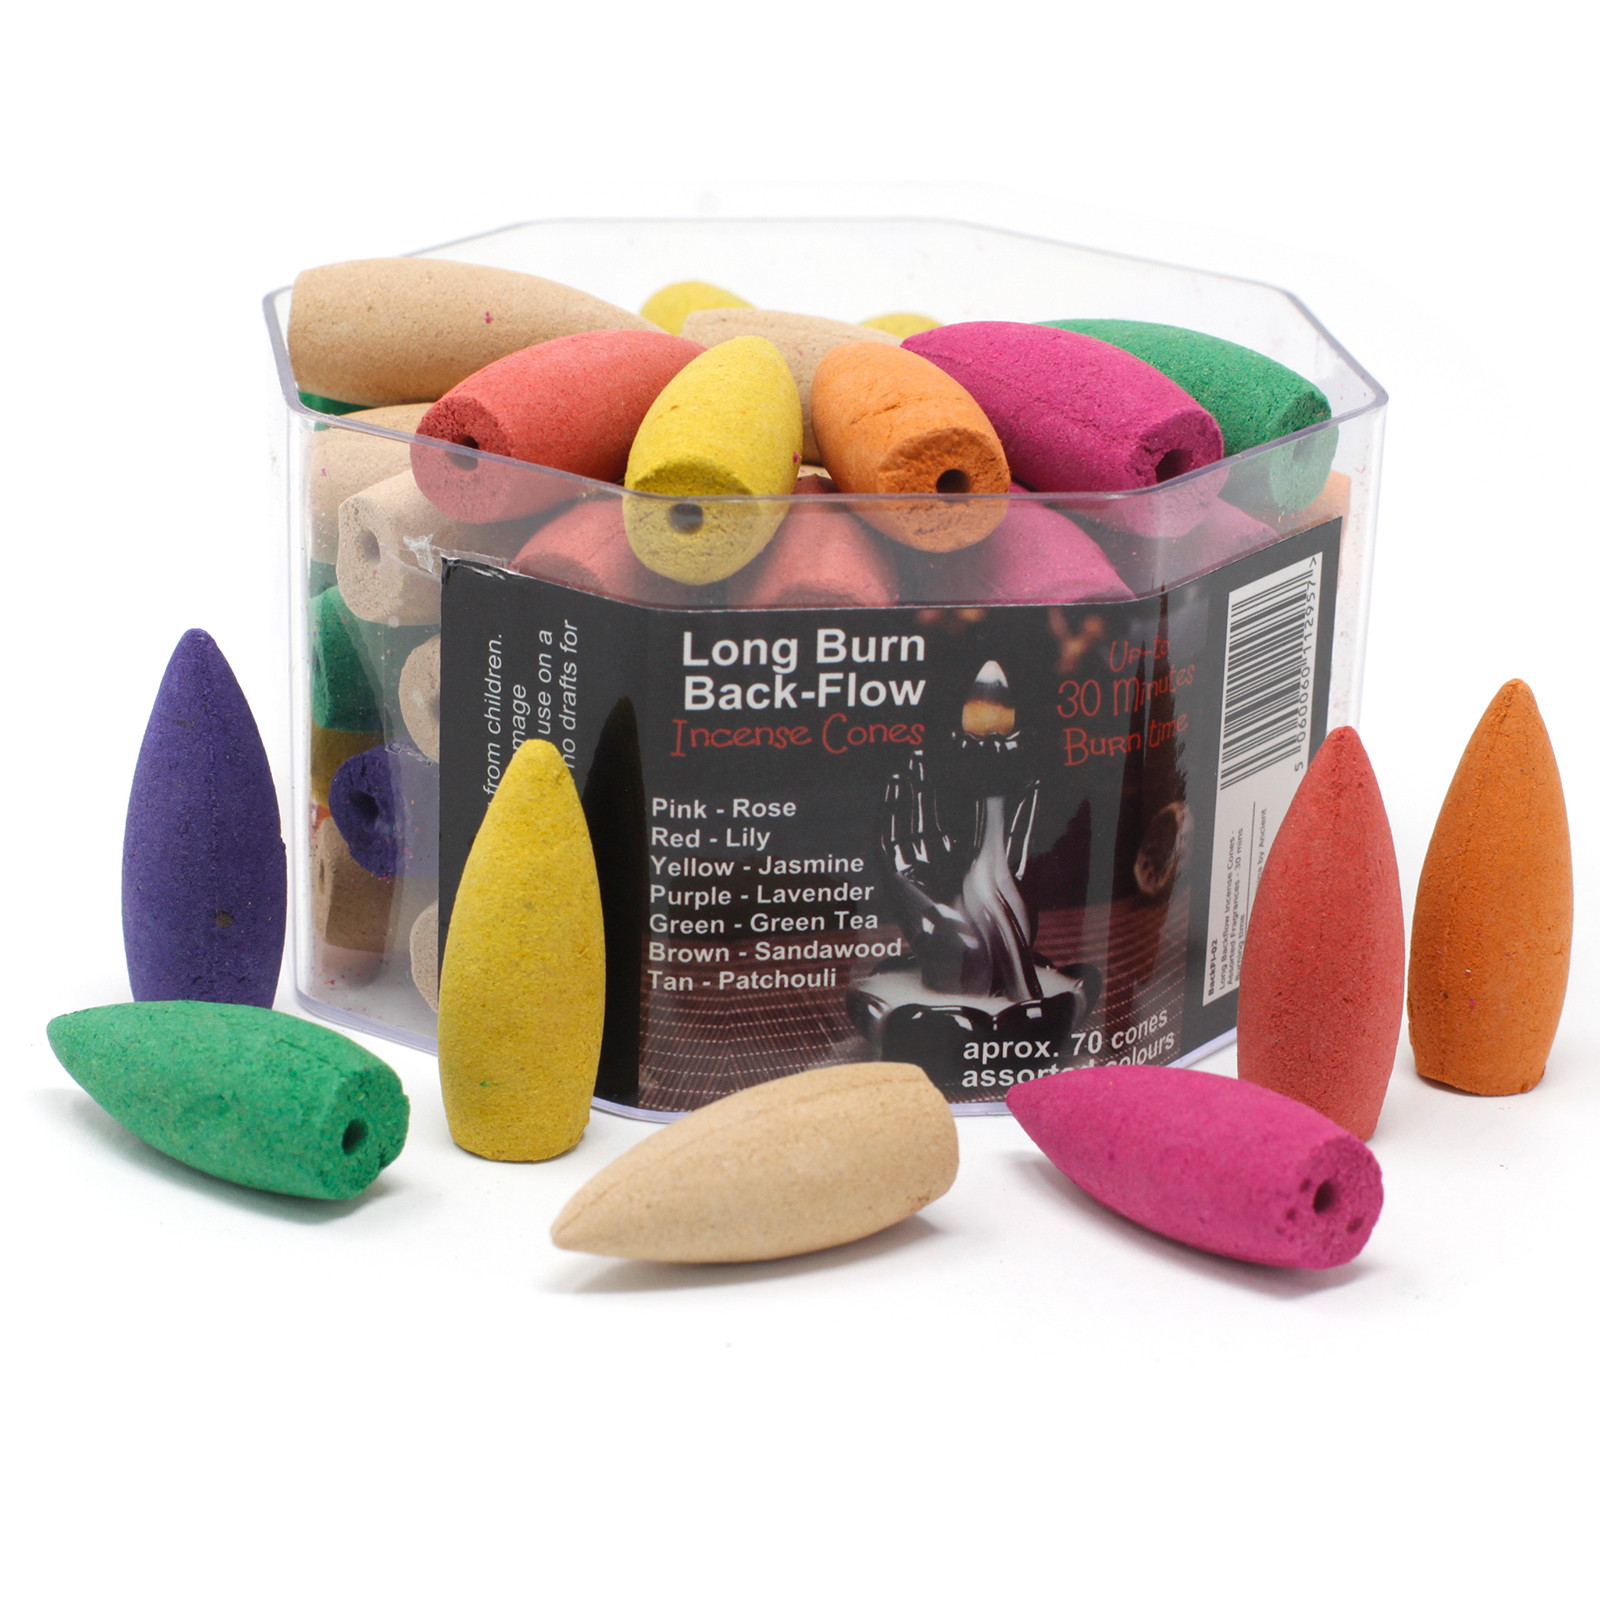 Long Backflow Incense Cones - Assorted Fragrances - Click Image to Close